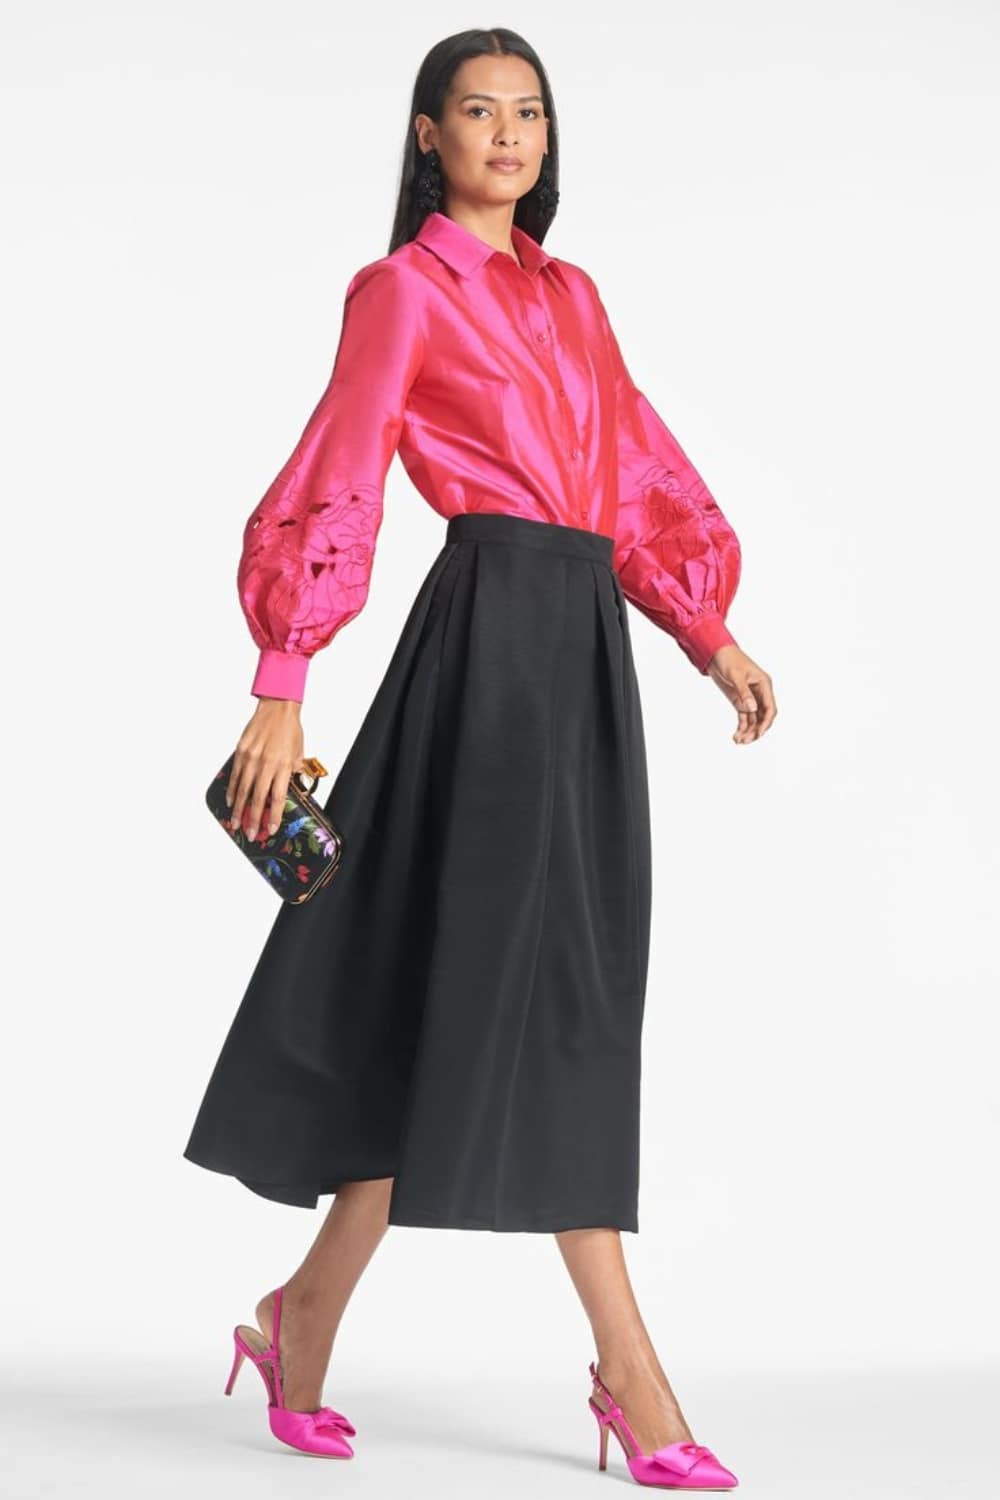 Fuchsia button down shirt with black pleated skirt outfit